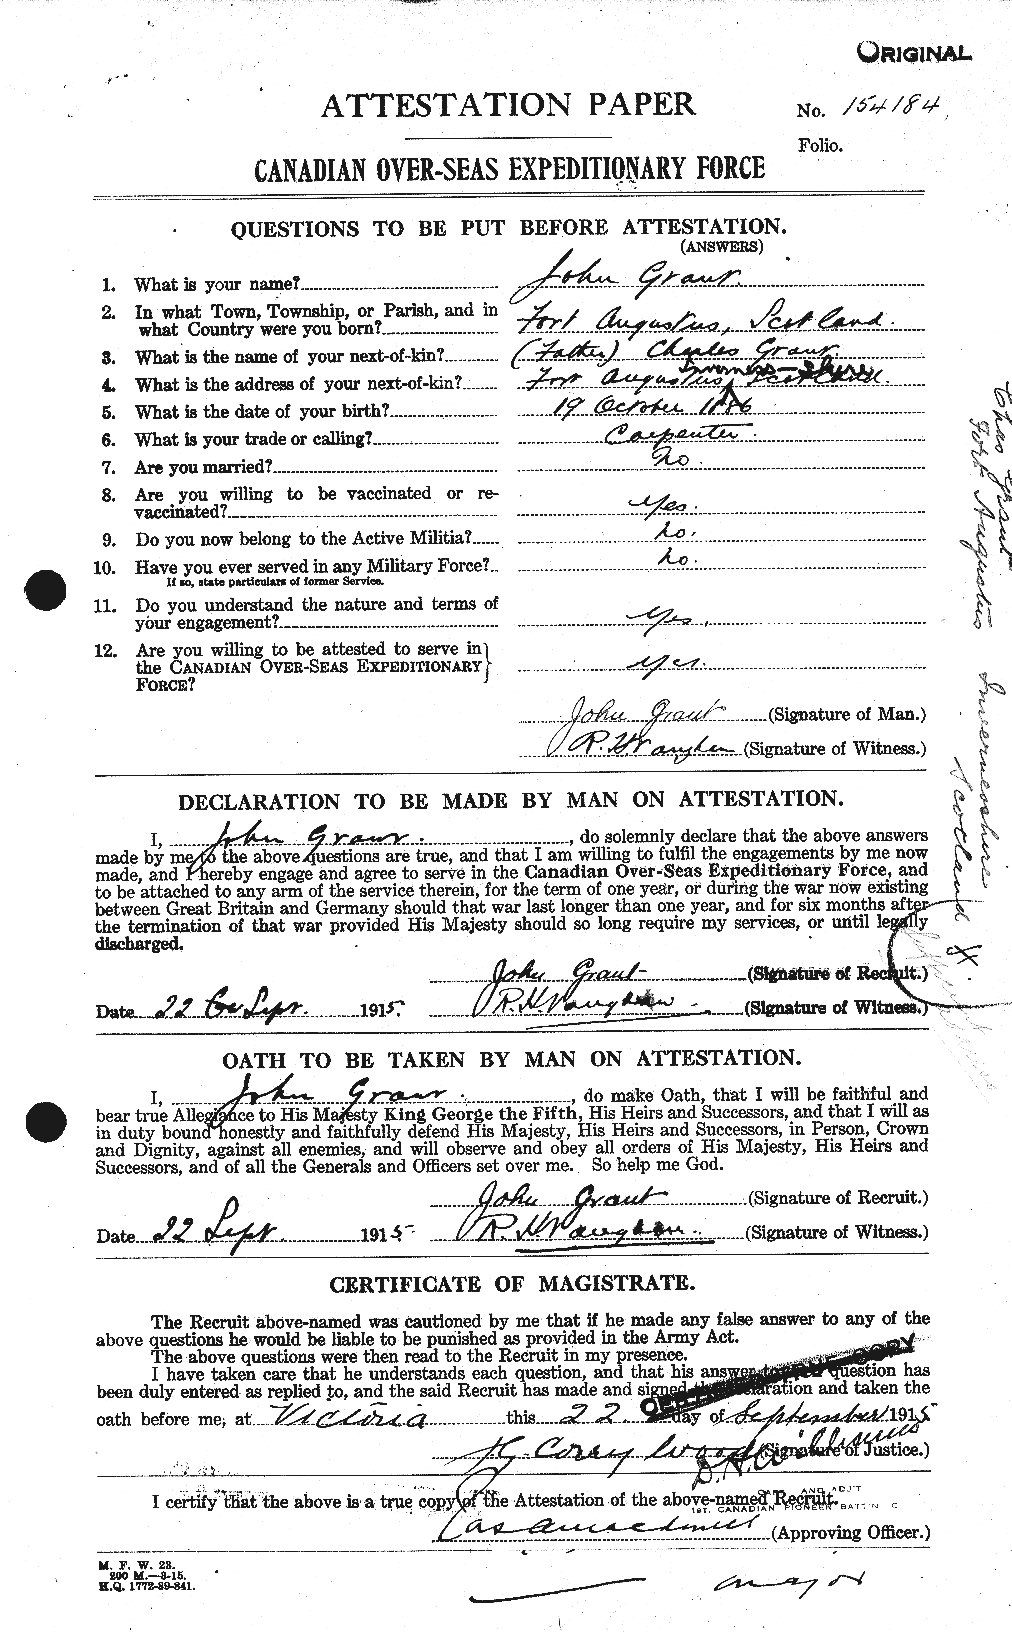 Personnel Records of the First World War - CEF 357134a